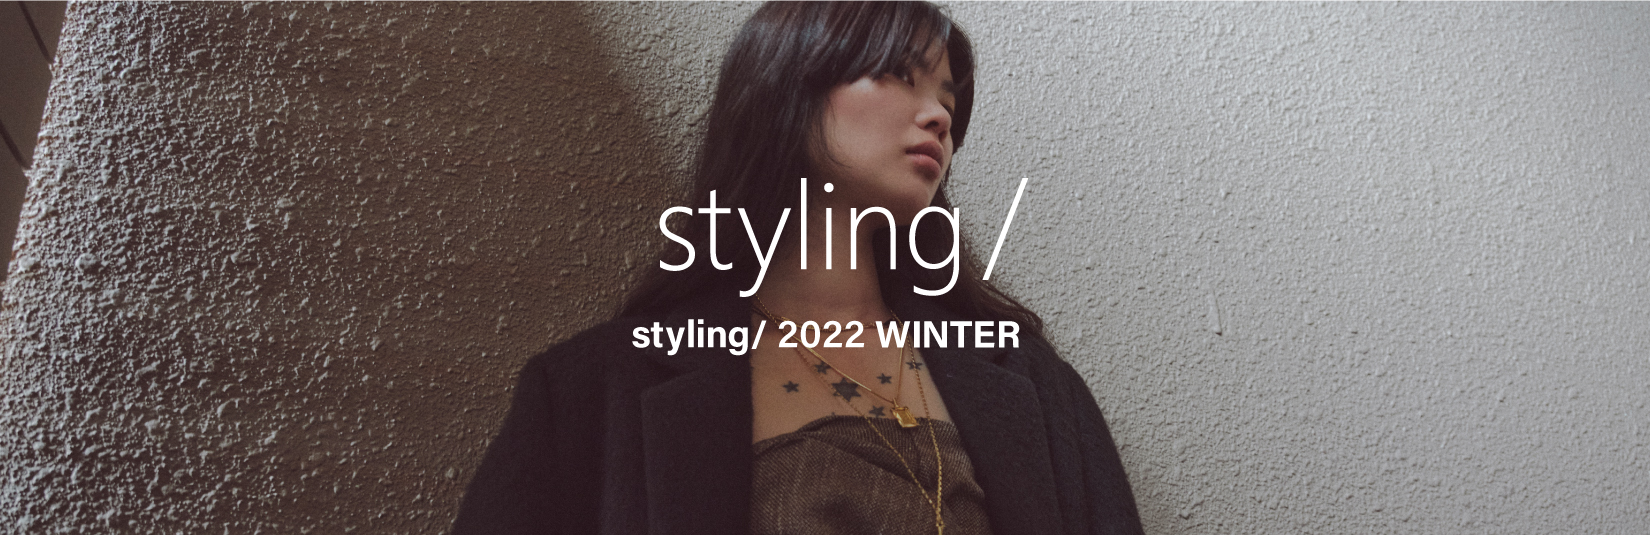 styling/ 2022 WINTER COMING SOON